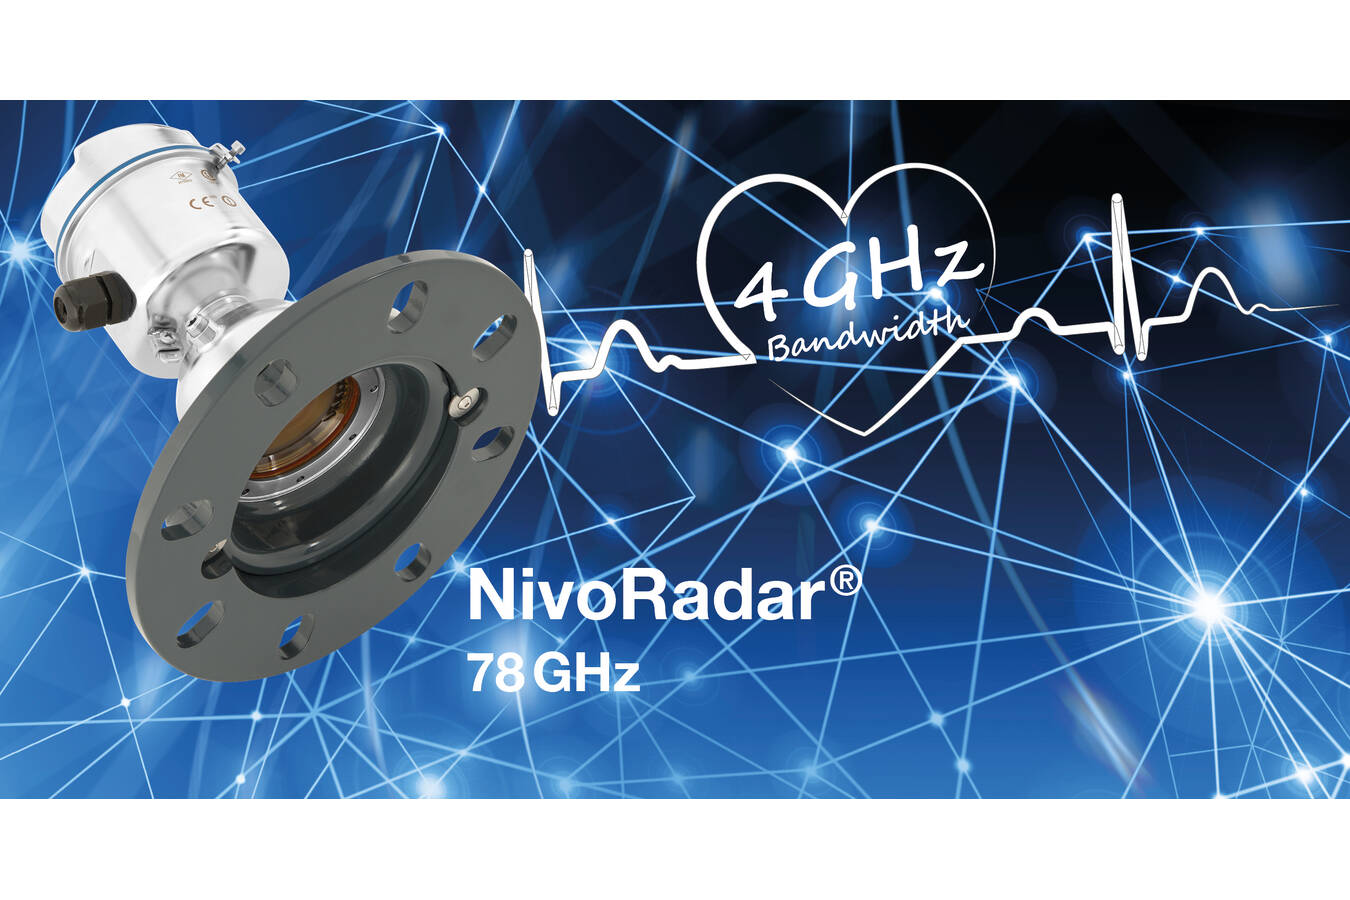 High frequency of 78 GHz